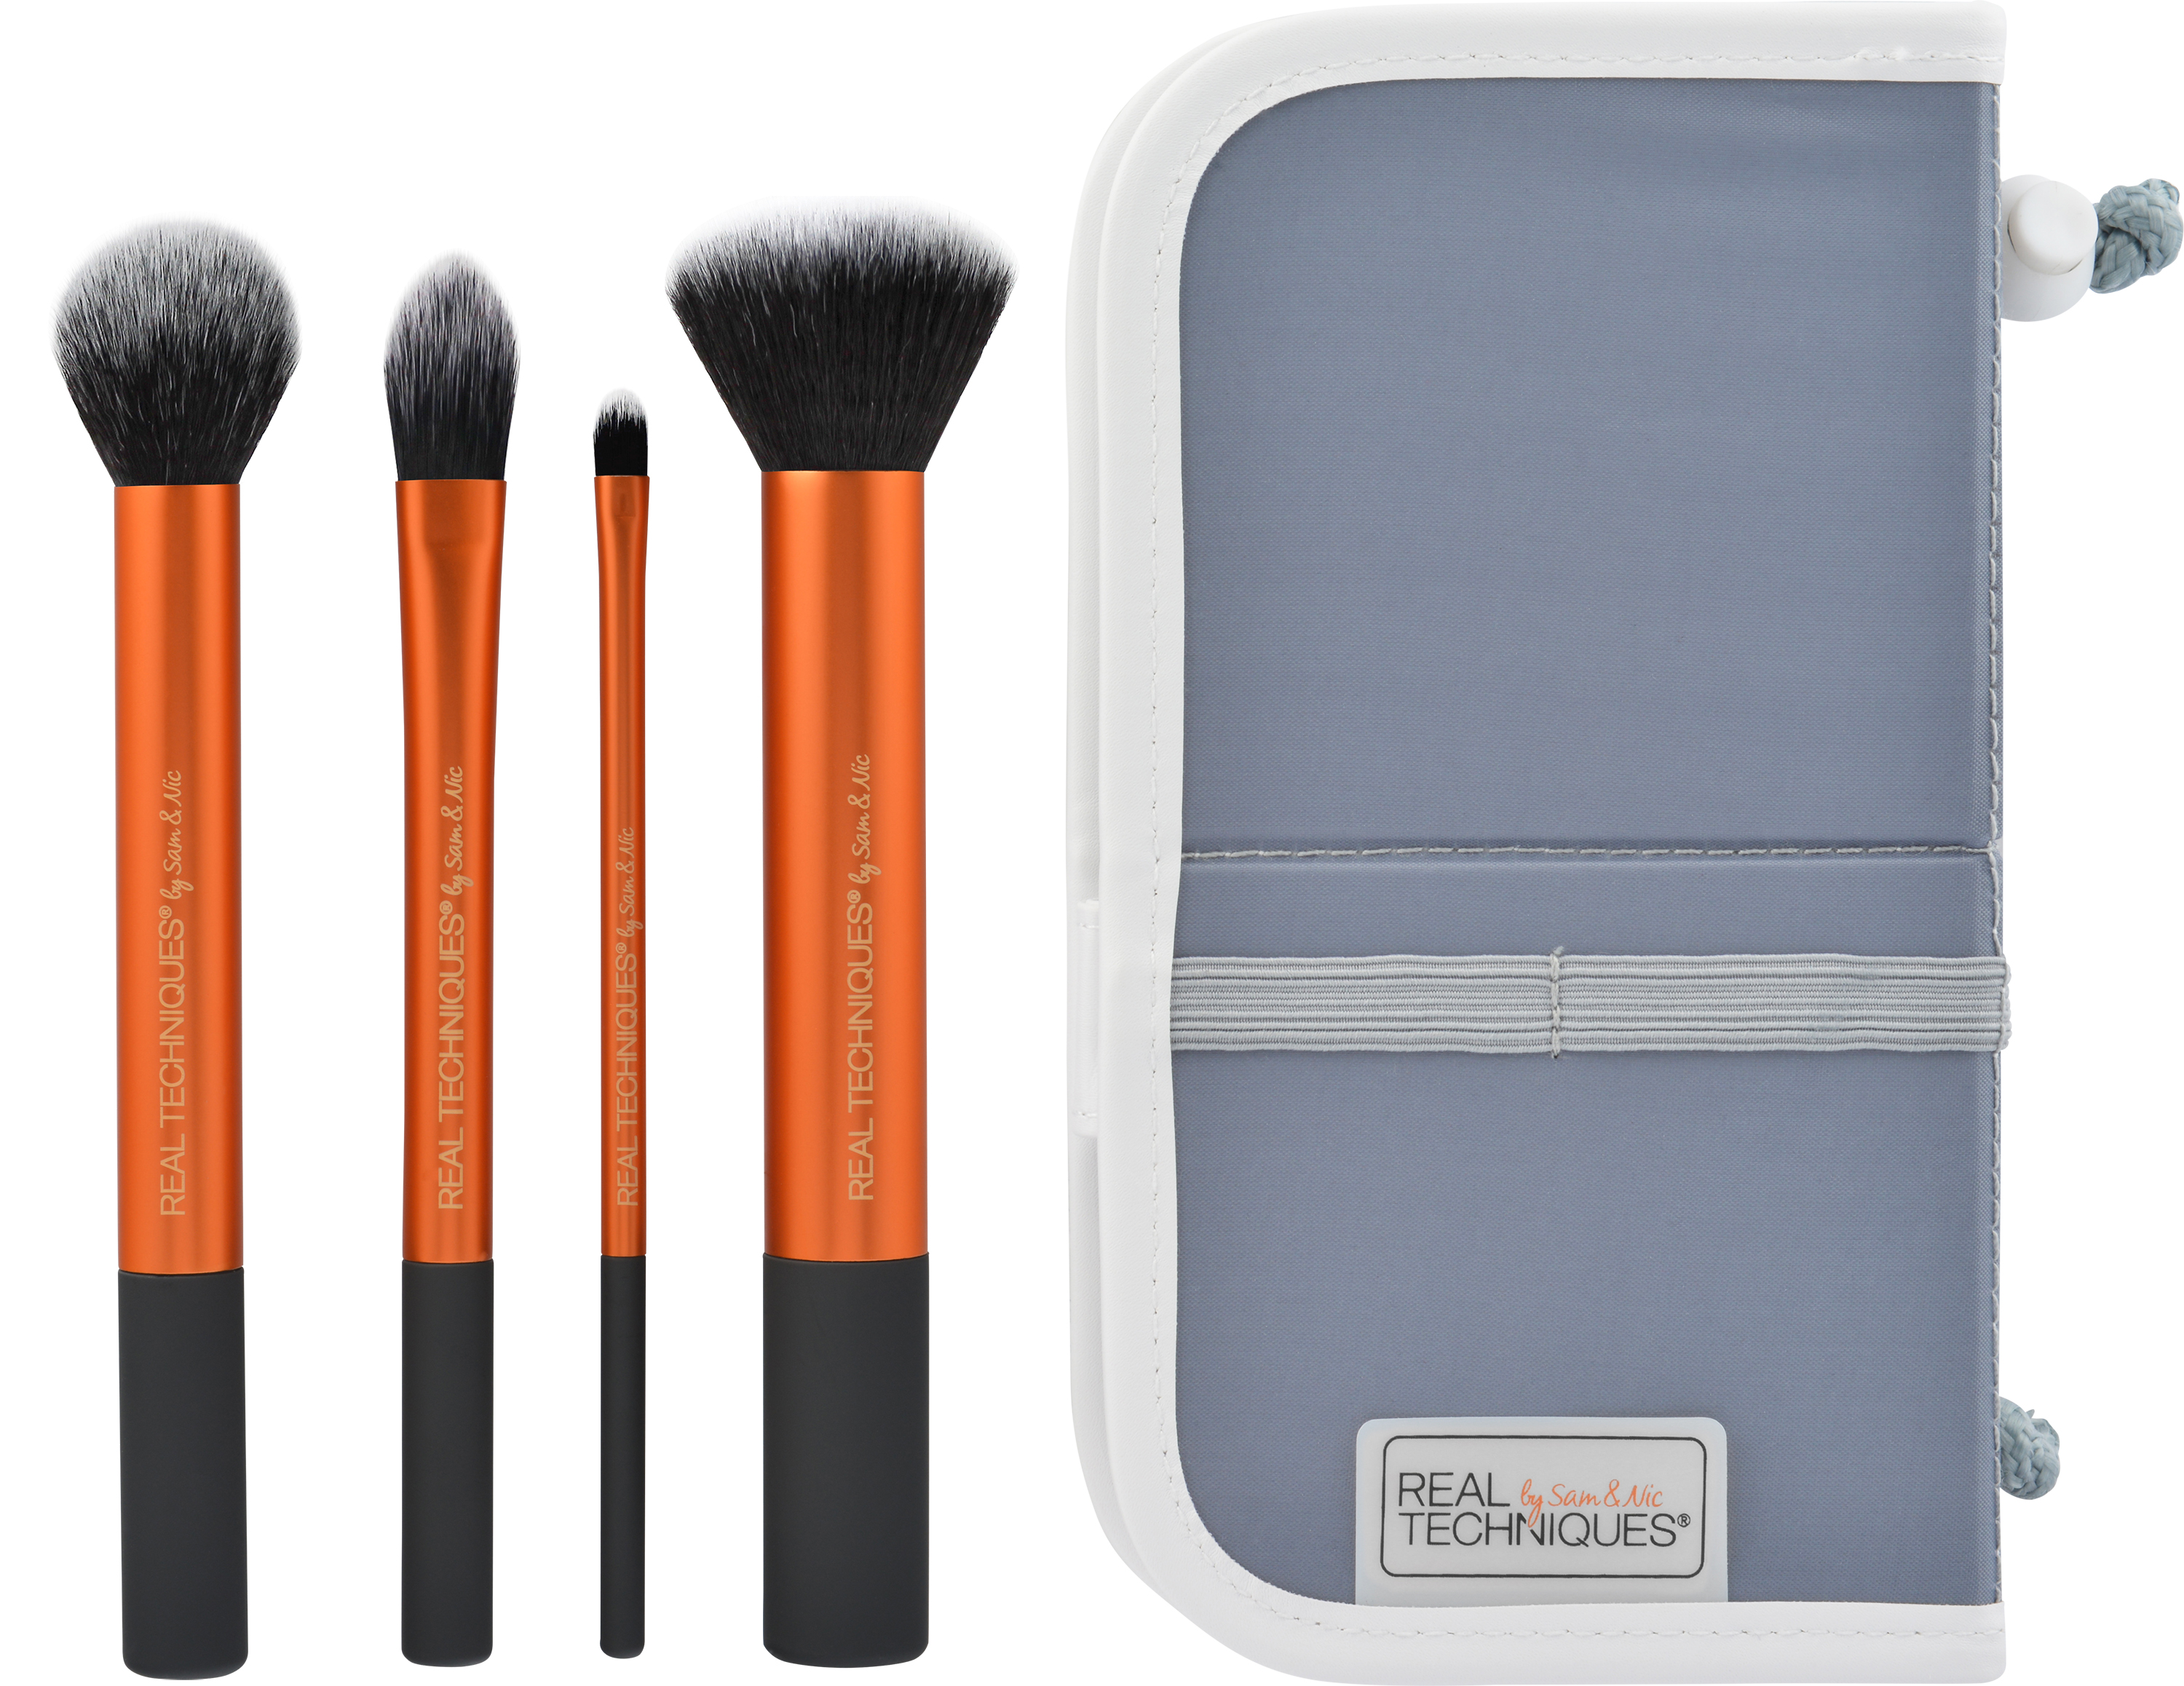 Real Techniques Core Collection Makeup Brush Set - image 1 of 4